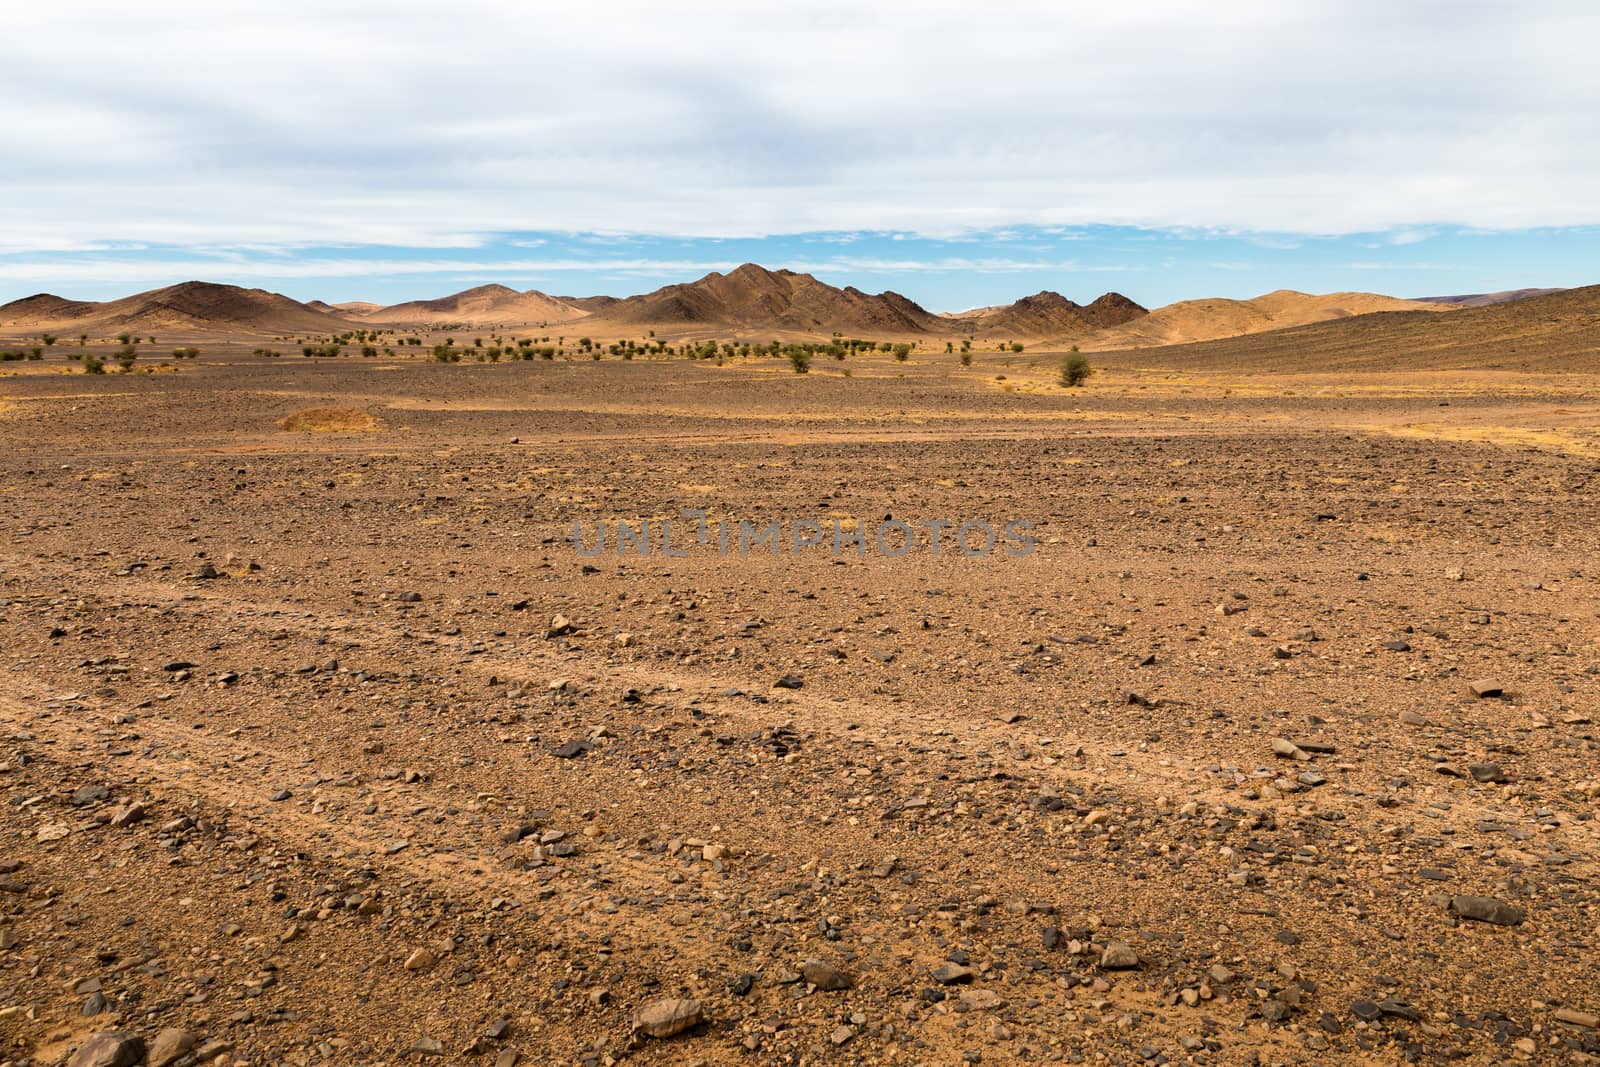 mountains against the blue sky in the Sahara desert of Morocco, landscape